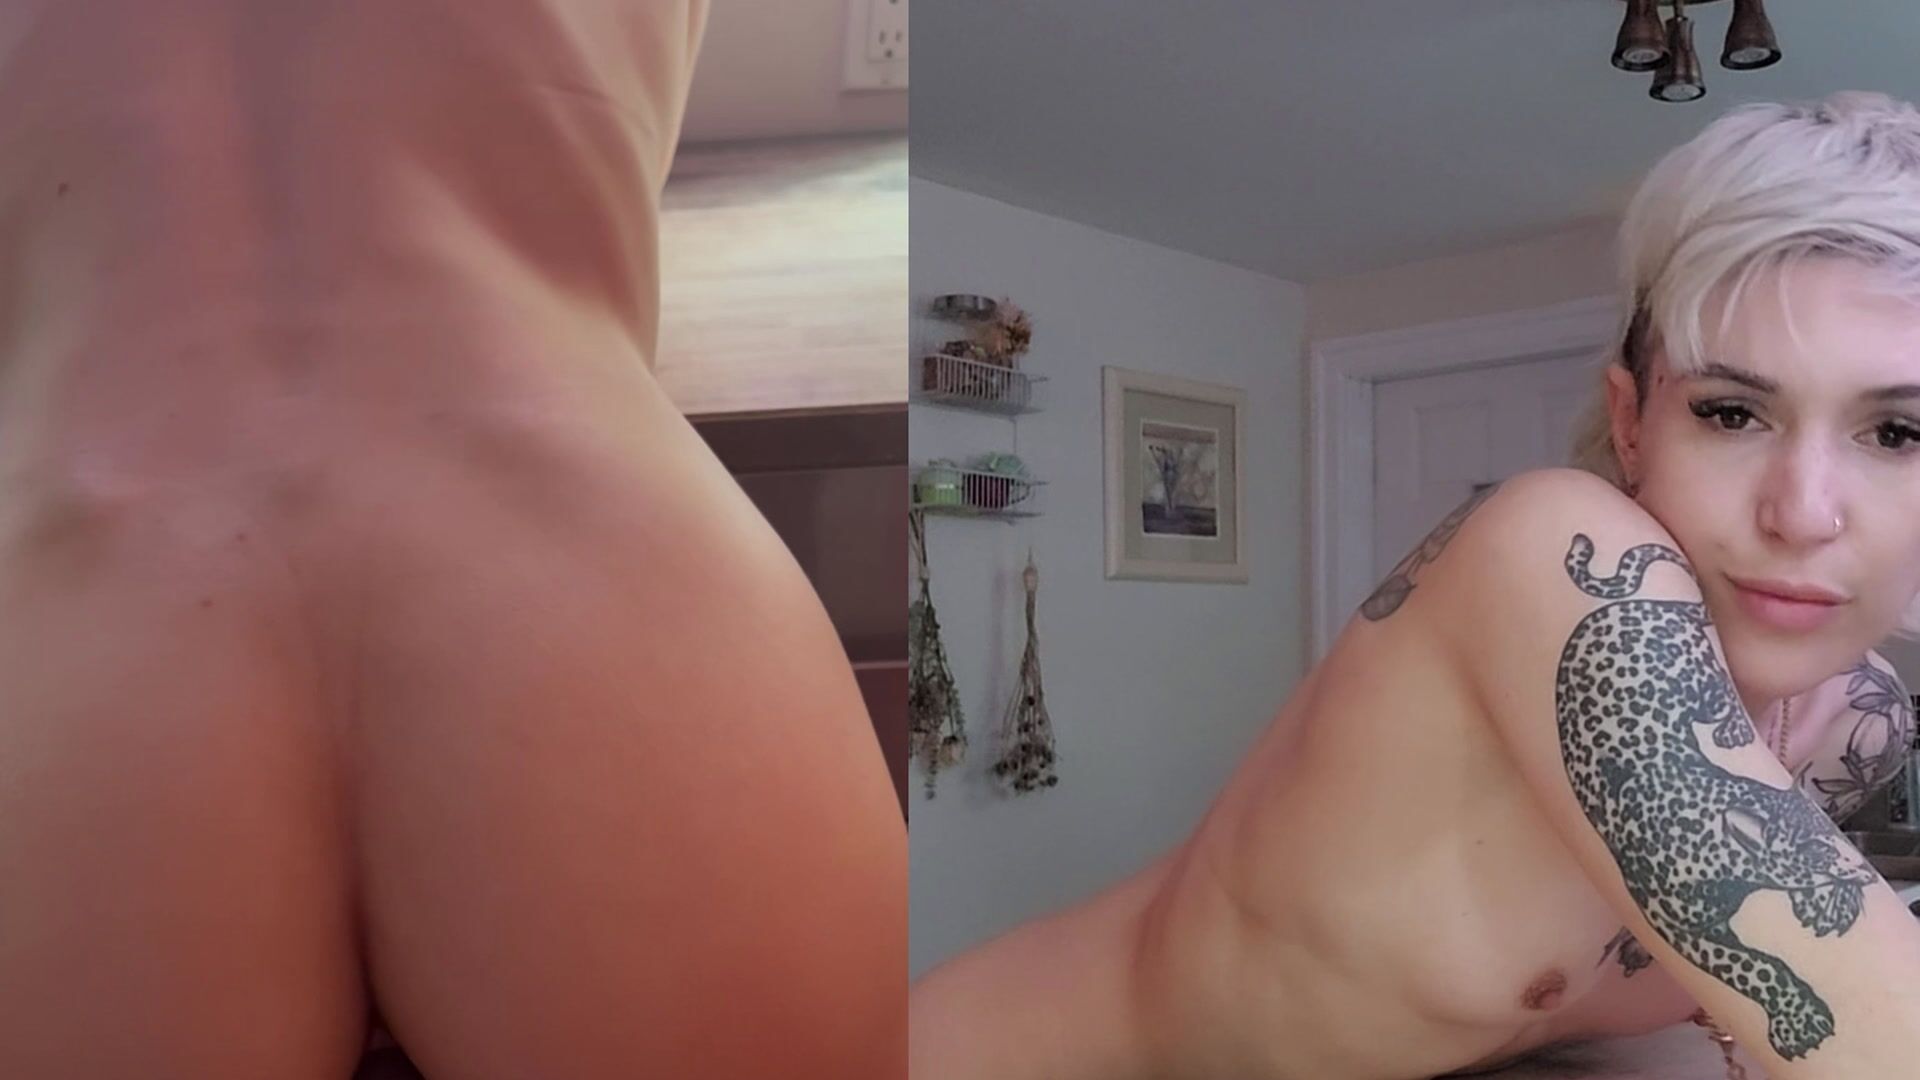 Bent over the counter getting my ass fucked by the machine till I cum. Split screen front/back view